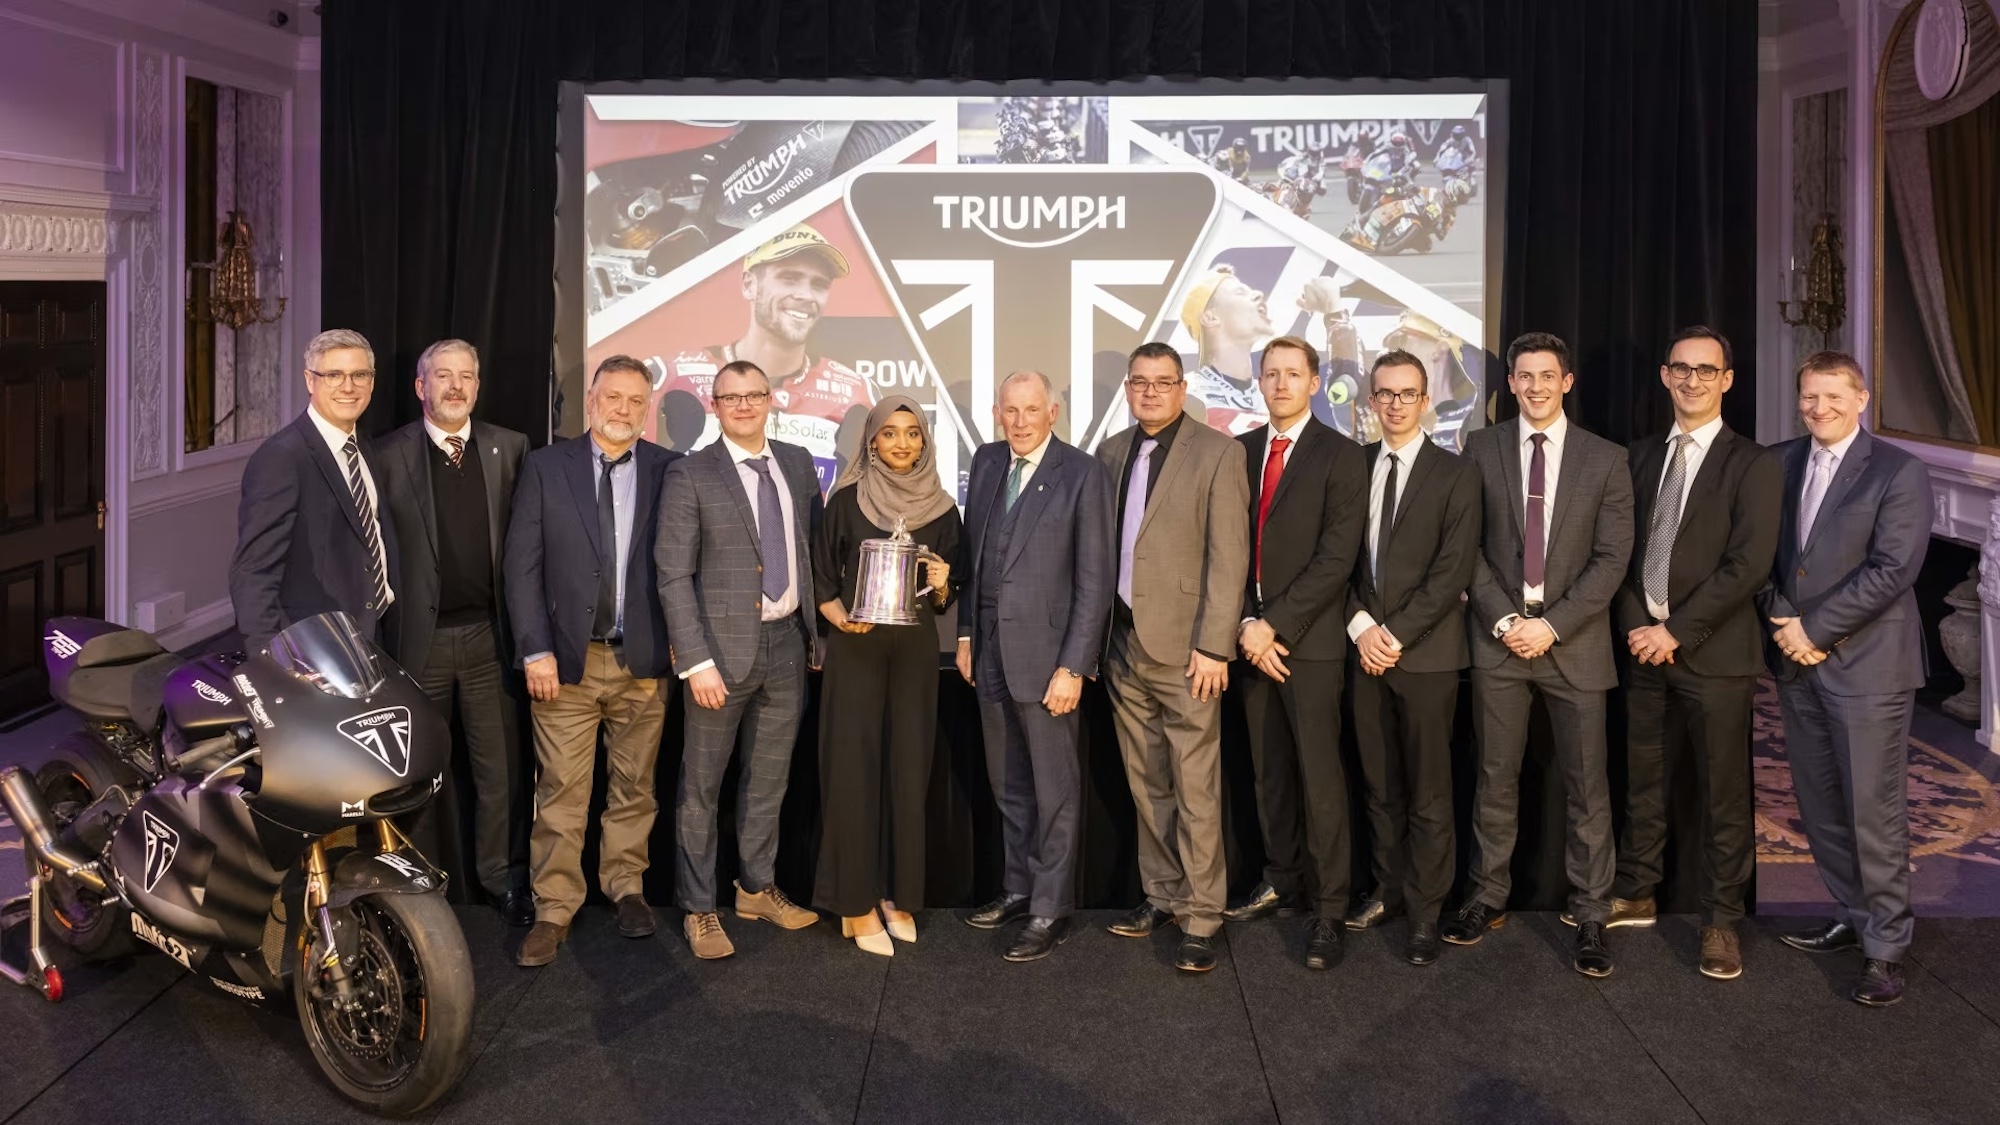 A group of people celebrating Triumph Motorcycles winning an award.